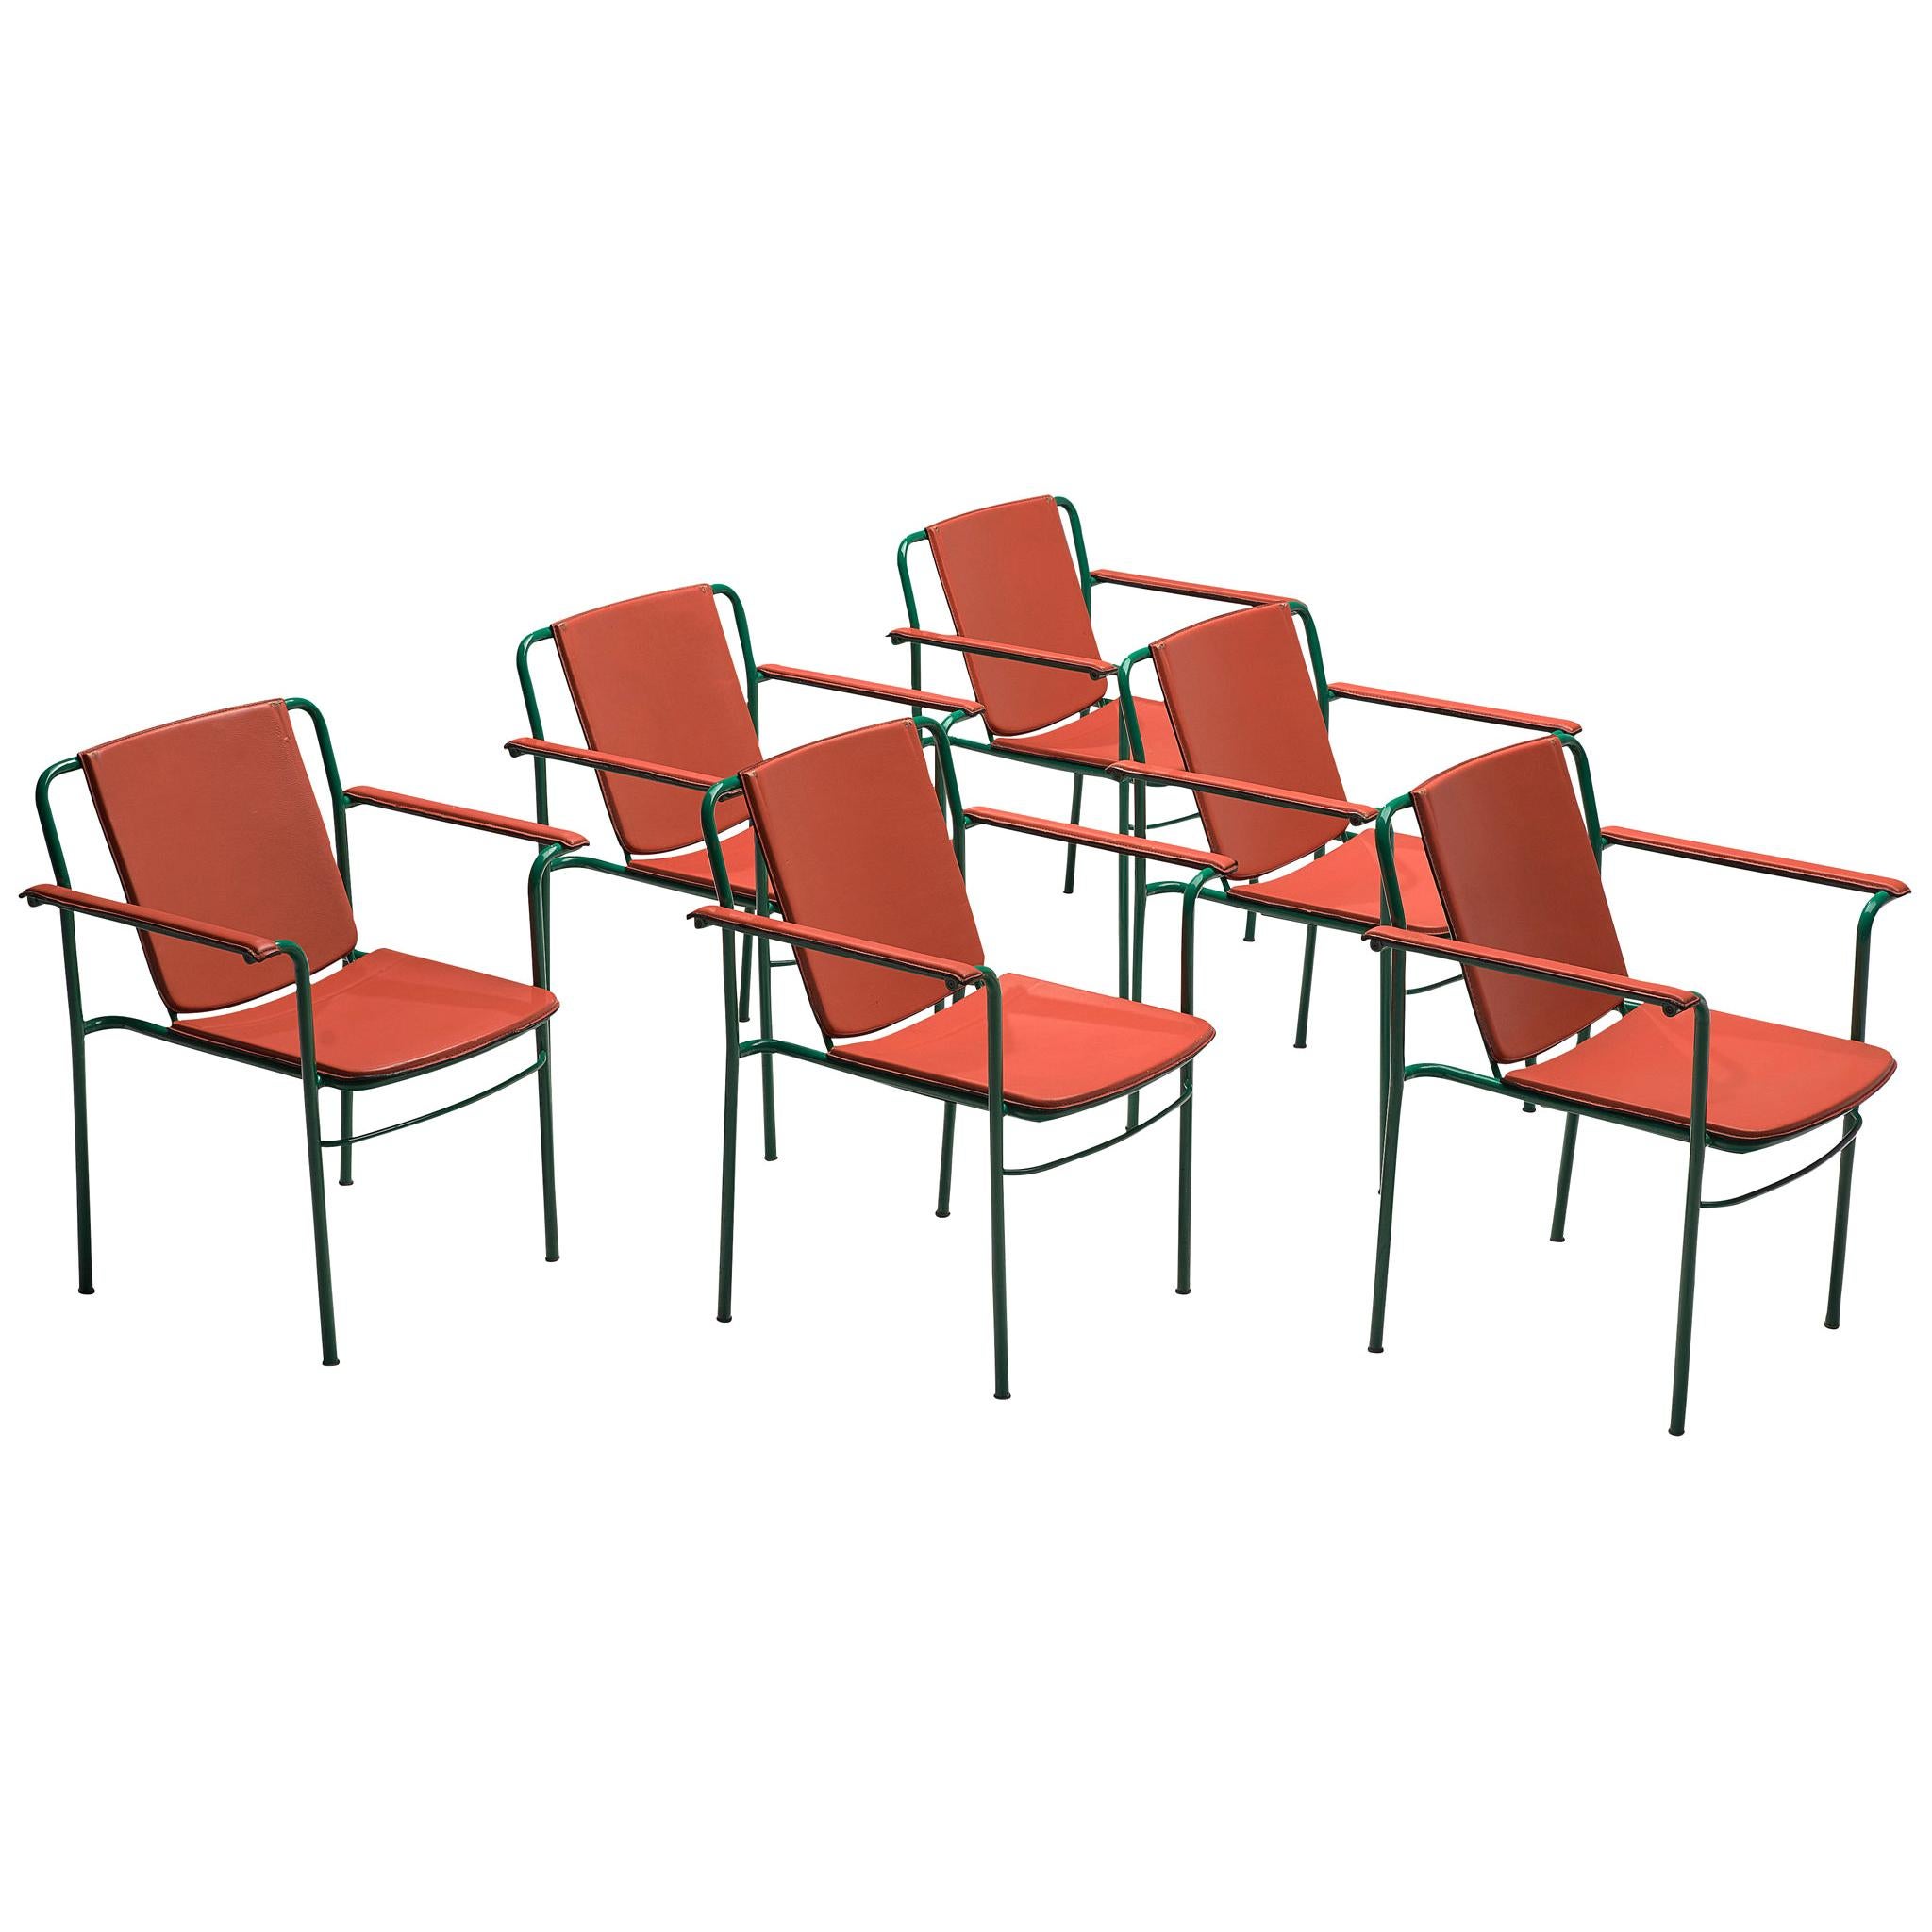 Mario Marenco for Poltrona Frau Set of Six 'Movie' Dining Chairs